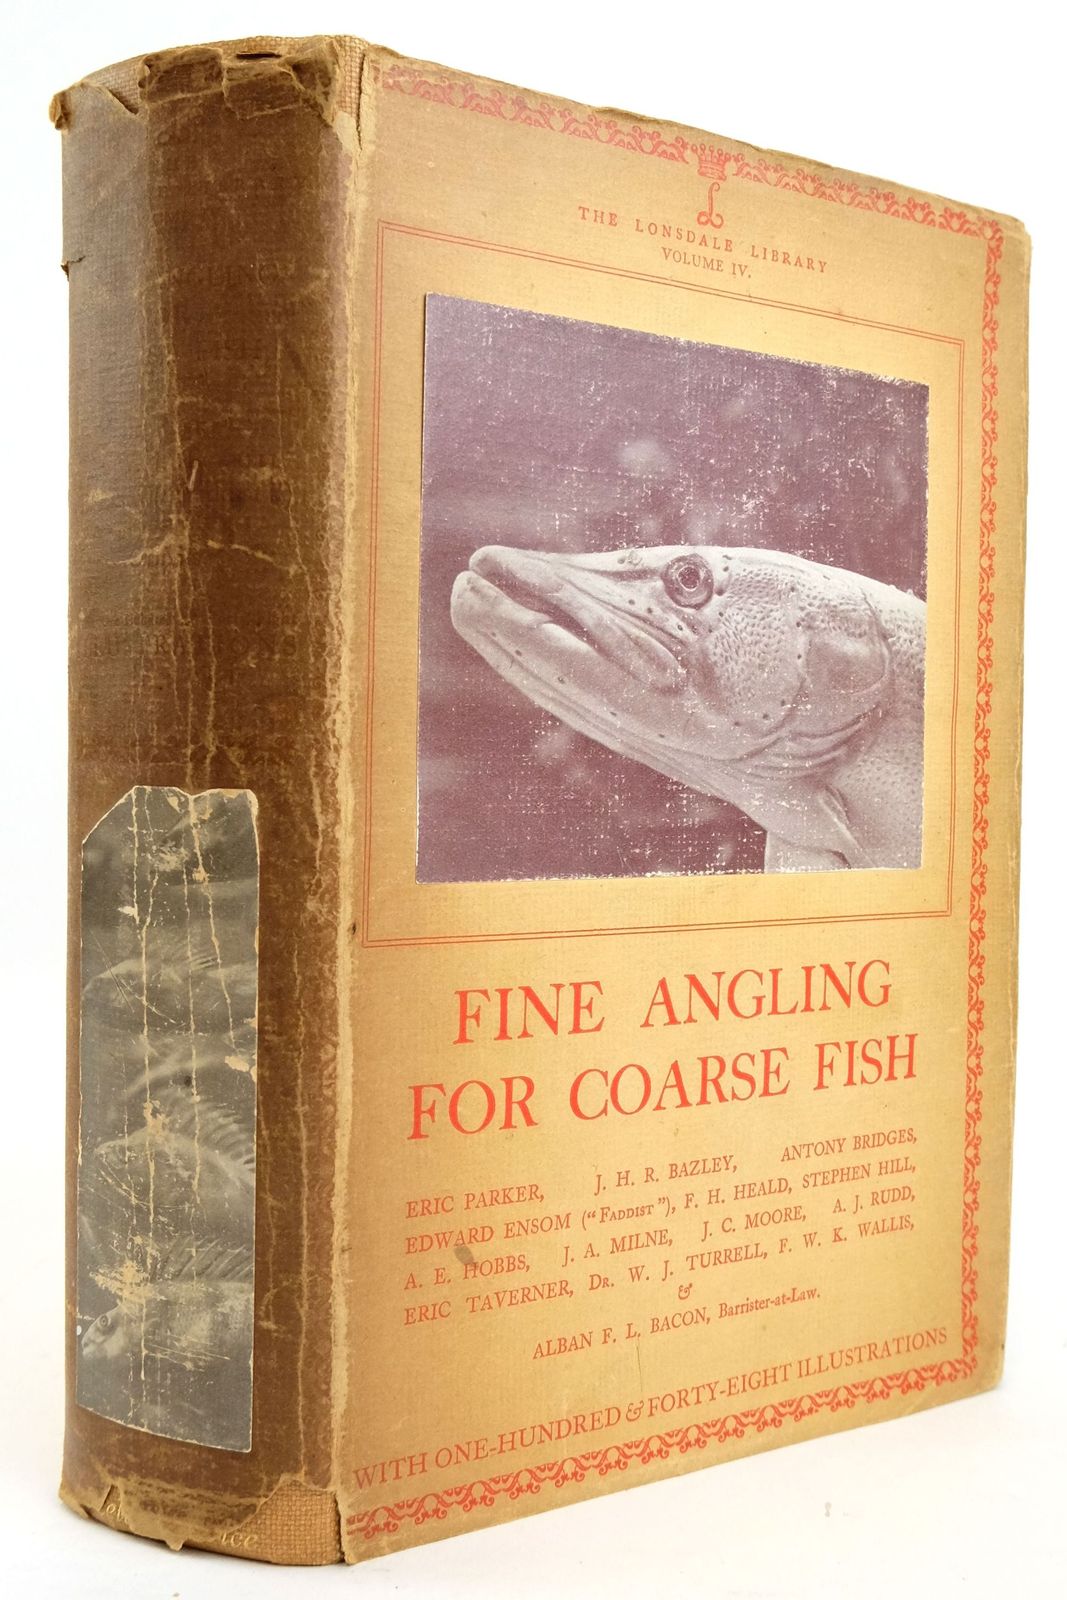 Photo of FINE ANGLING FOR COARSE FISH - LONSDALE LIBRARY VOL IV written by Parker, Eric published by Seeley, Service & Co. (STOCK CODE: 1820169)  for sale by Stella & Rose's Books